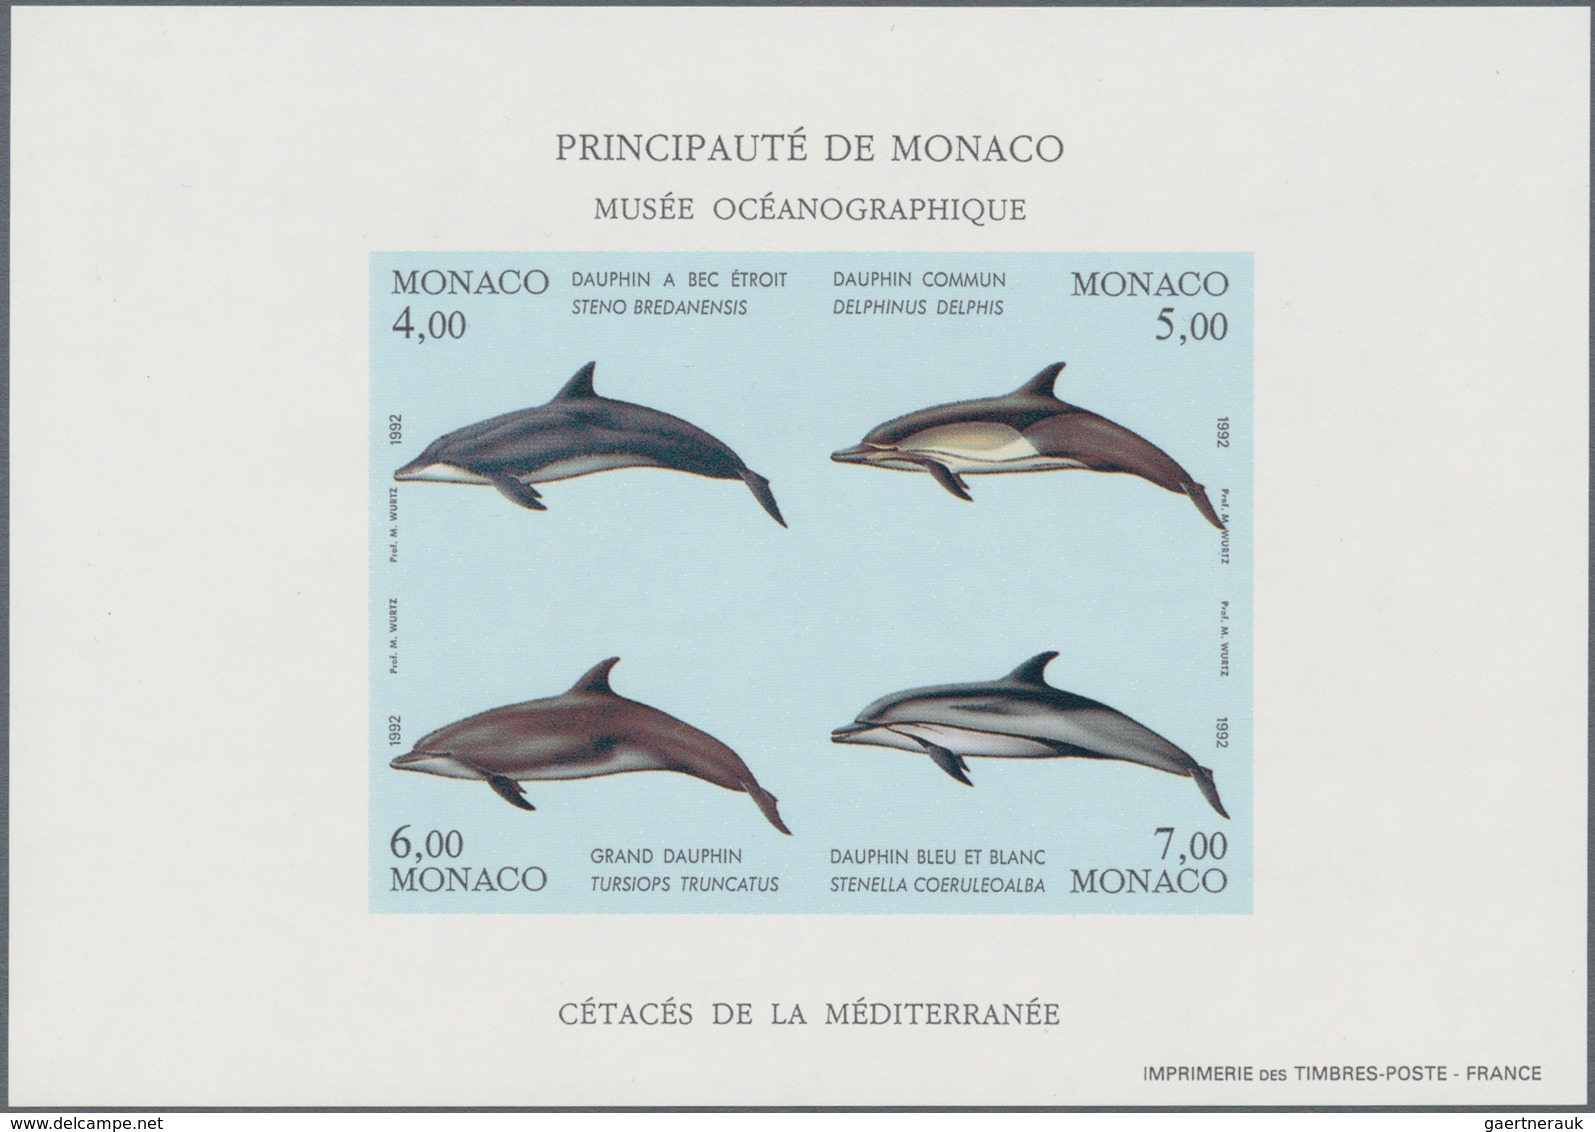 Monaco: 1964/1994, incredible accumulation with 515 IMPERFORATE and SPECIAL miniature sheets (perf./